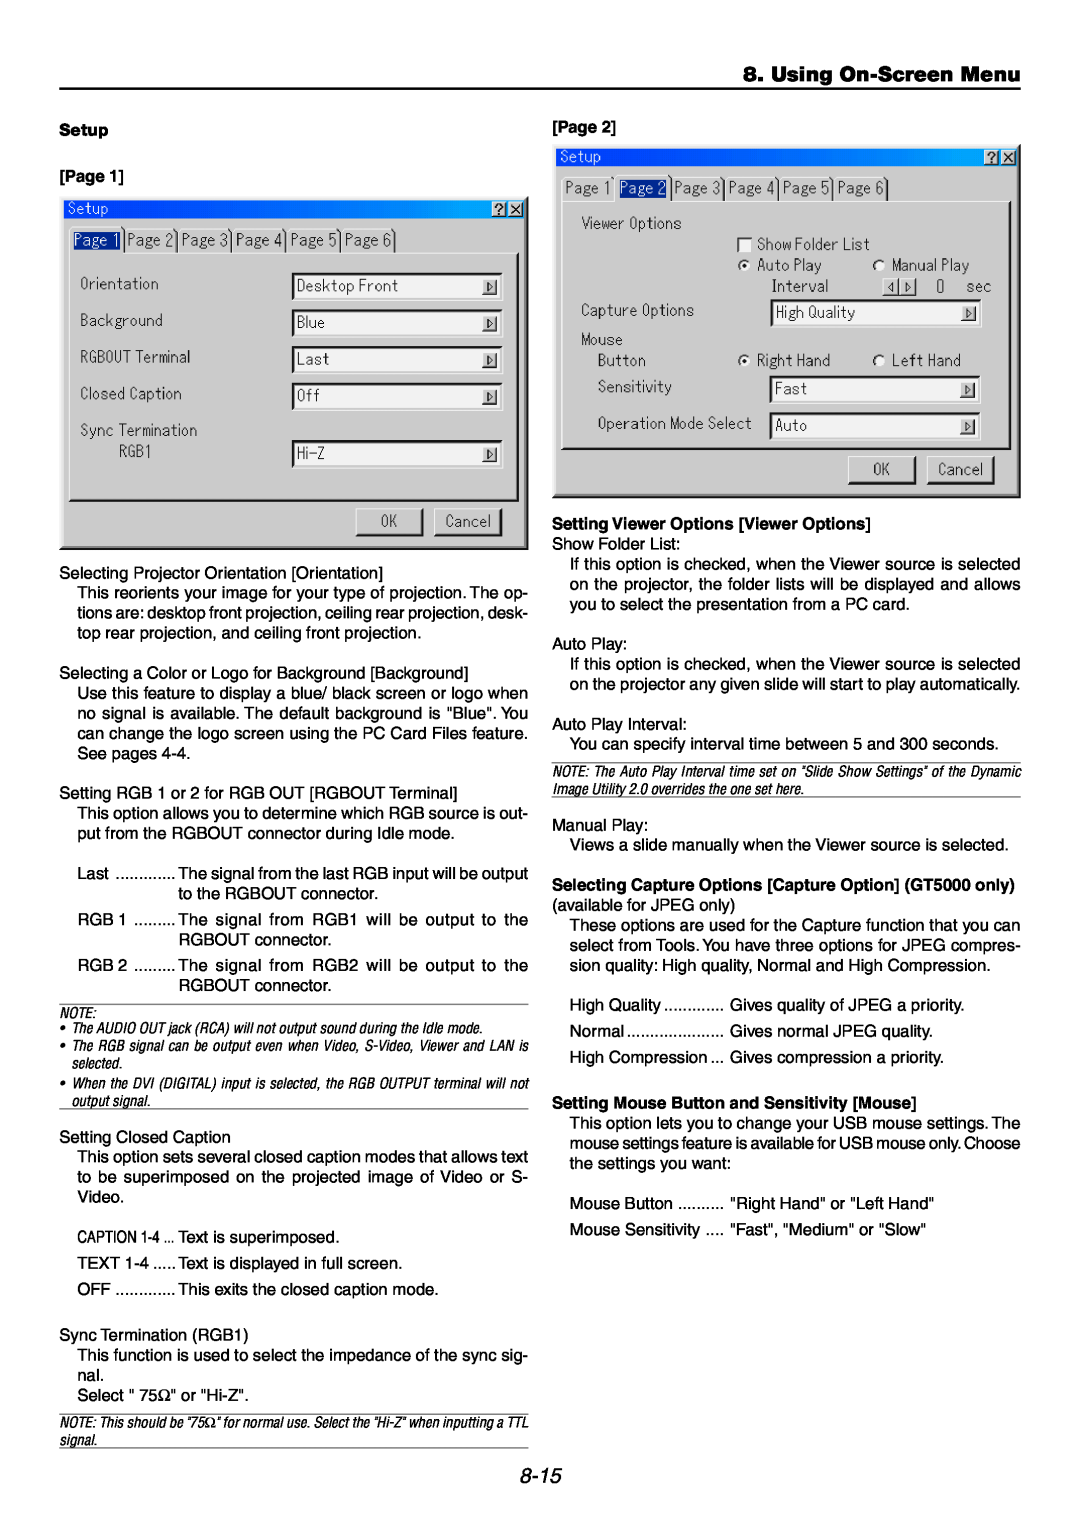 NEC GT6000 user manual Using On-ScreenMenu, 8-15, Setup, Page Setting Viewer Options Viewer Options 